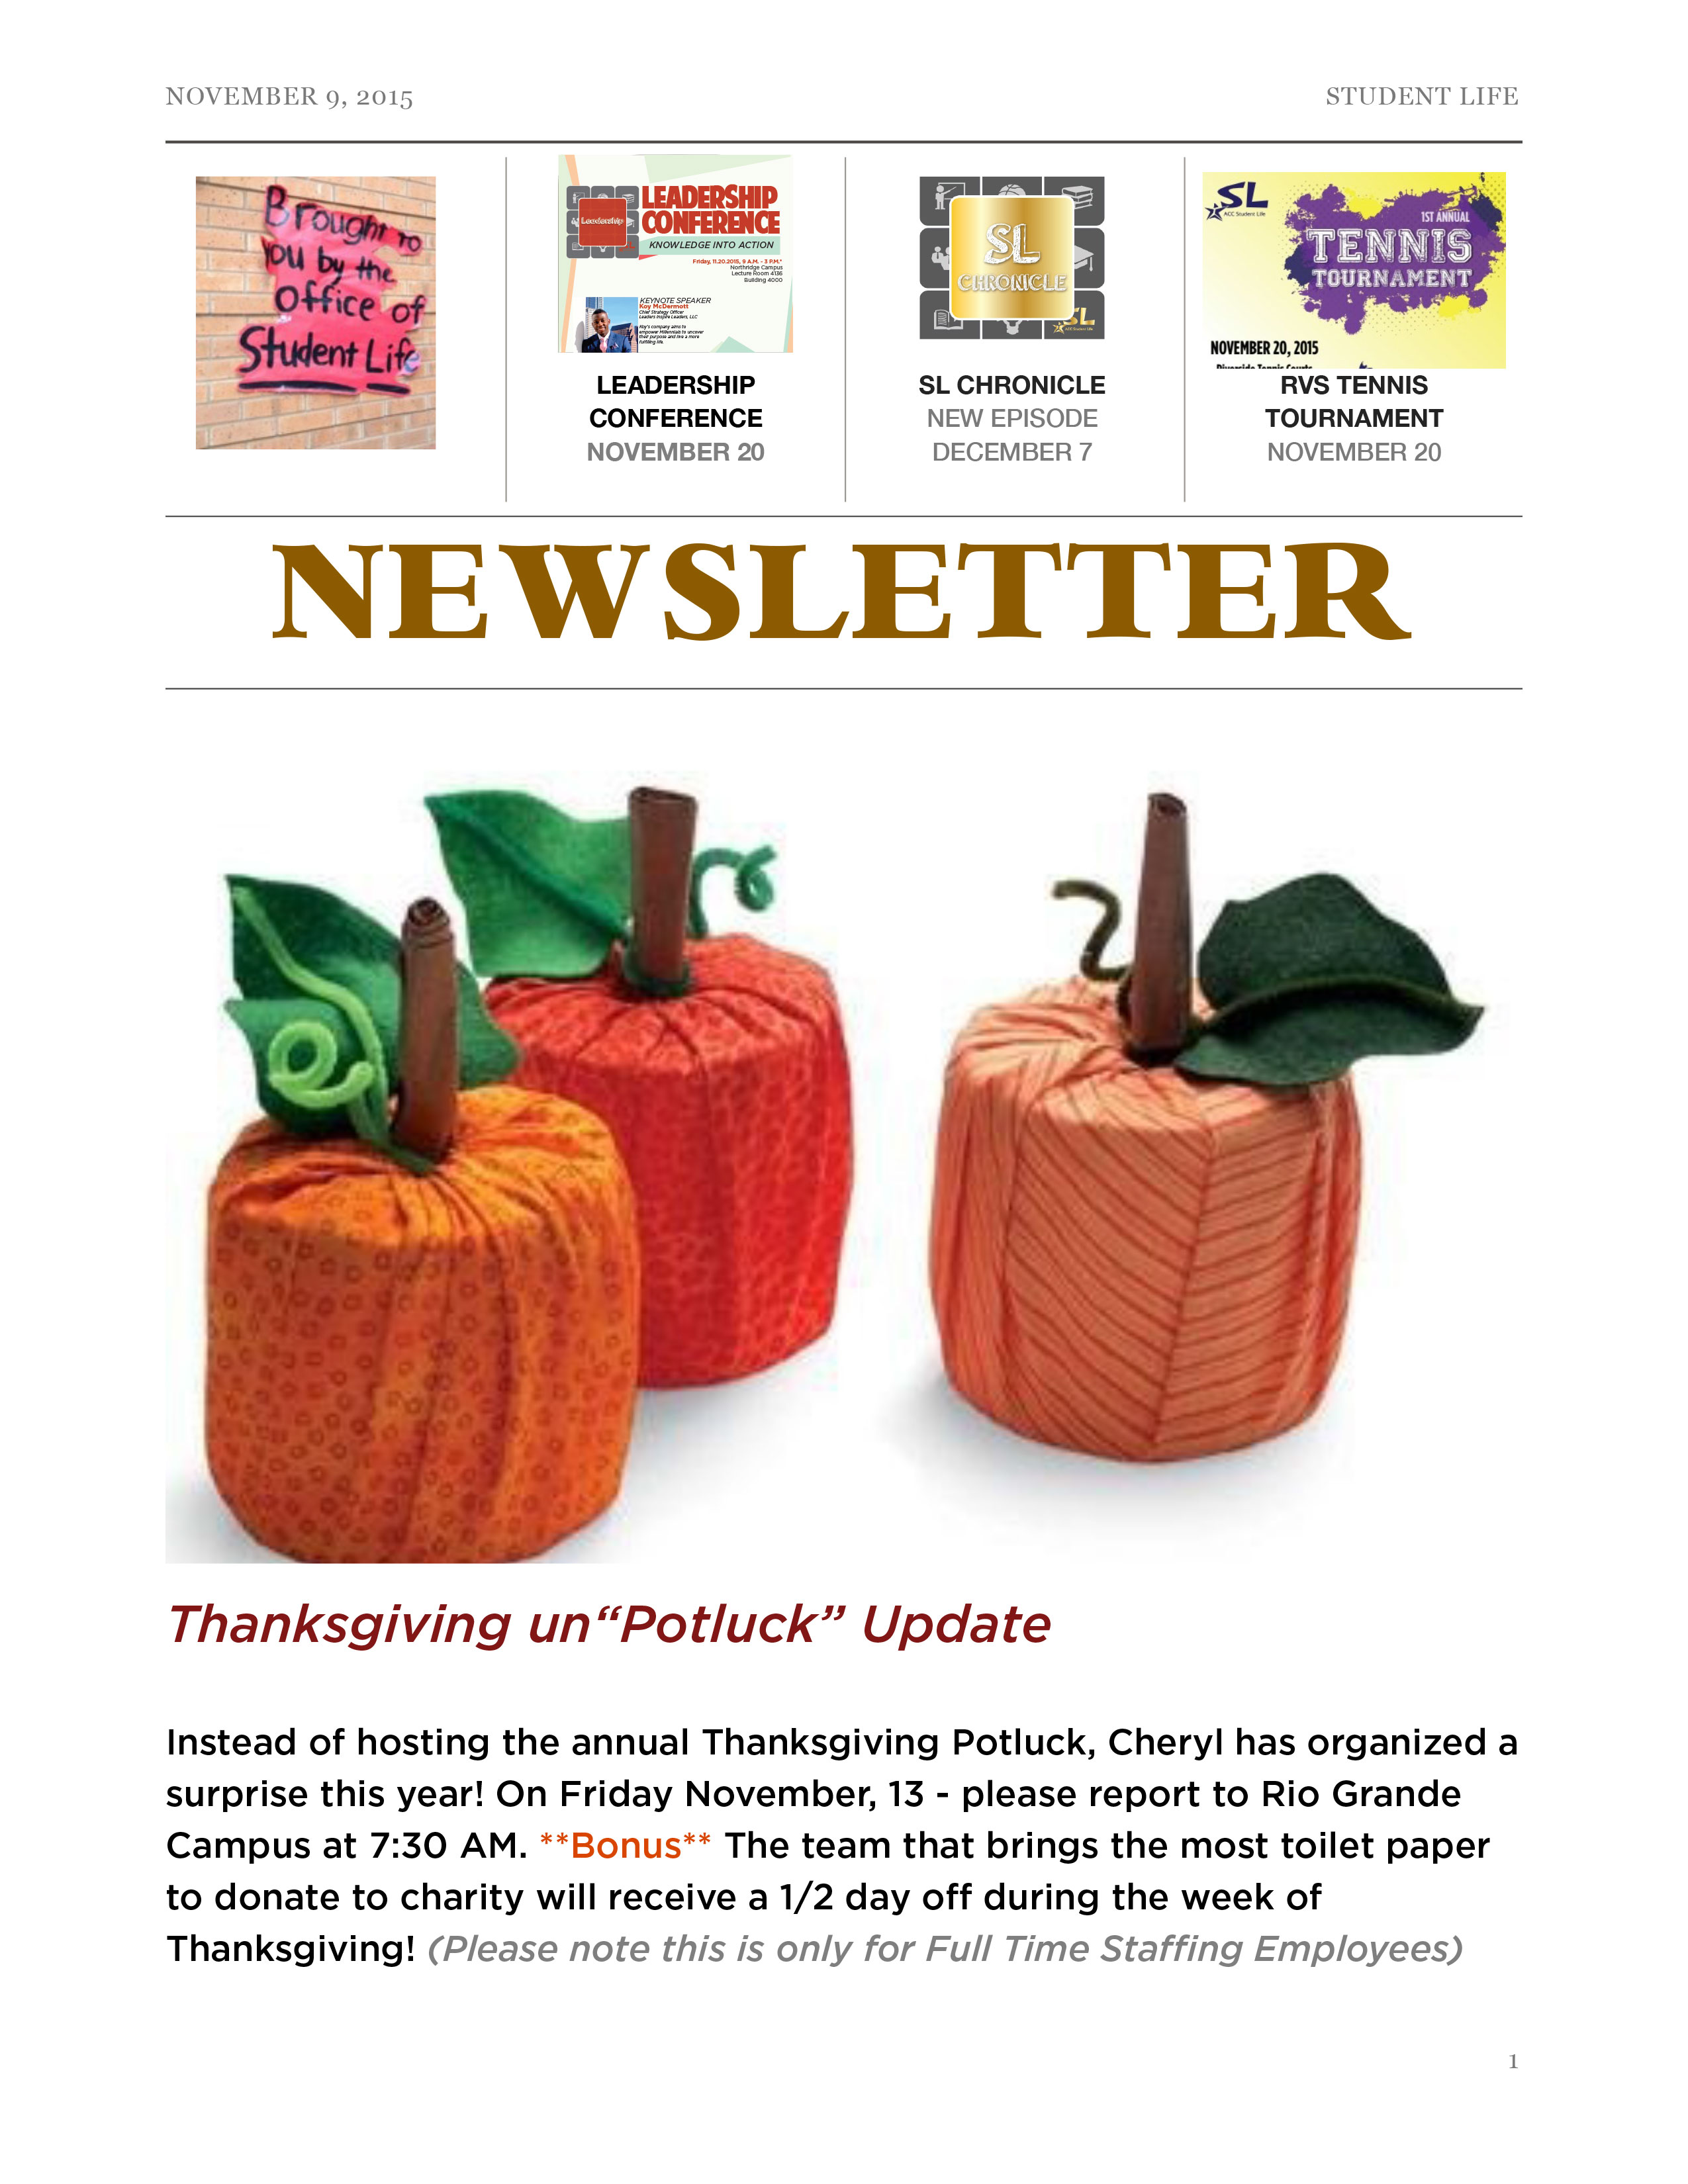 Staff Newsletters | ACC Student Life